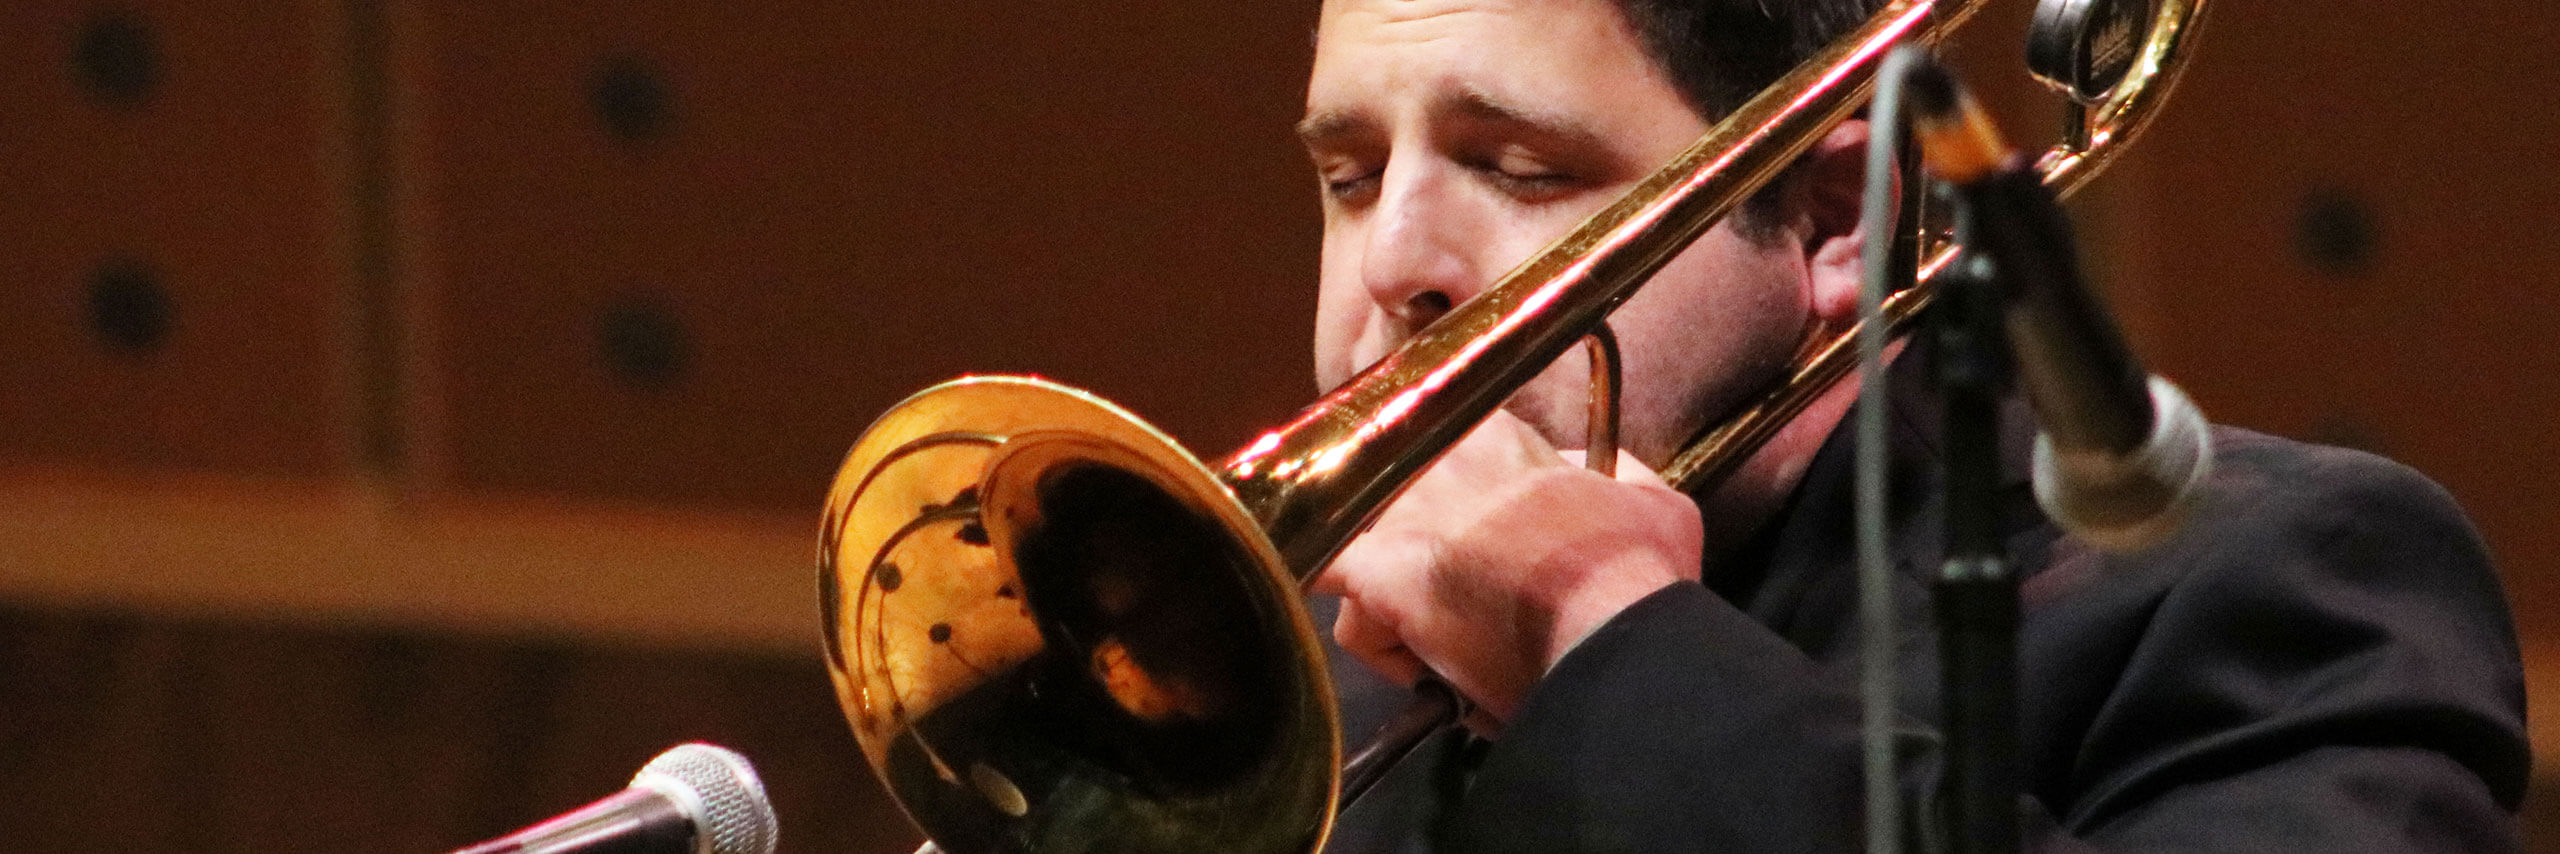 A trombonist plays into a microphone.